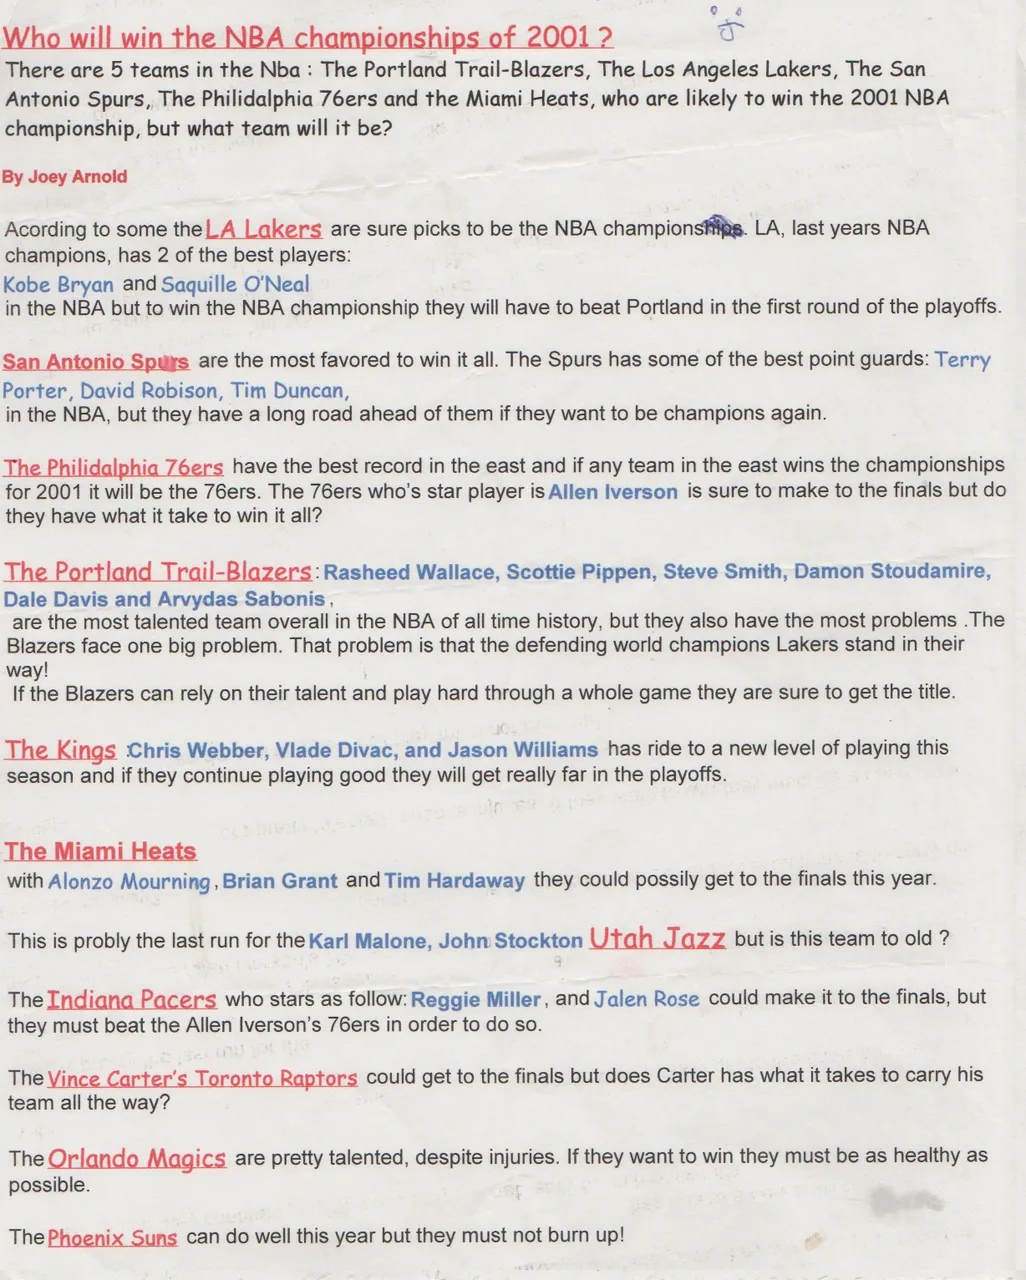 2001 - NBA Playoffs Predictions - by Coolkid Joey Arnold 2.jpg